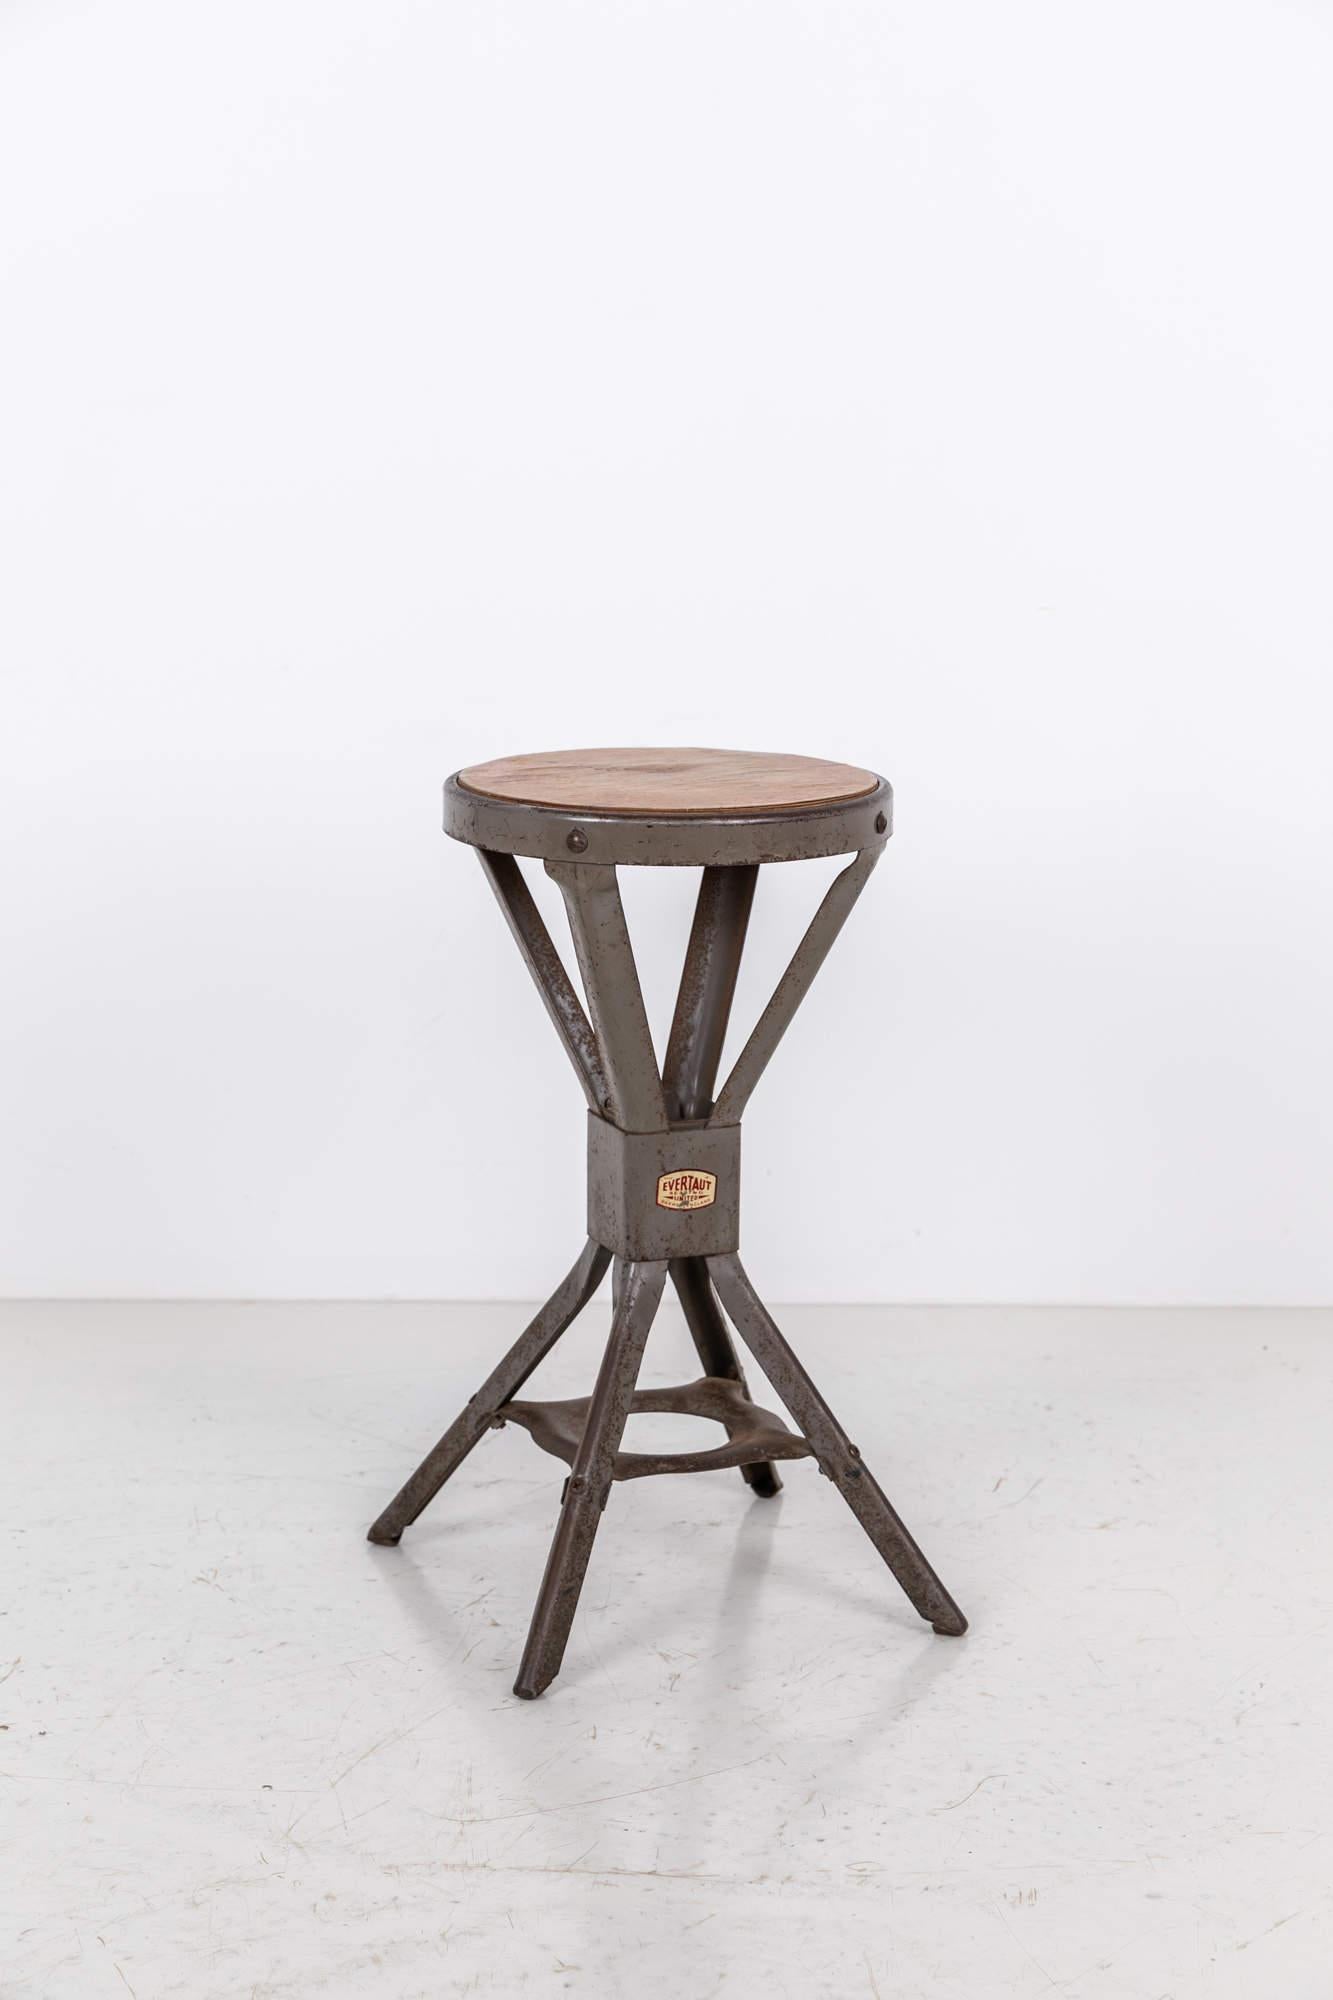 Simple yet elegantly formed industrial stool made in England by Evertaut. c.1940

Iconic shaped steel frame and original grey paint and circular ply top. Evertaut maker's label to stem. 